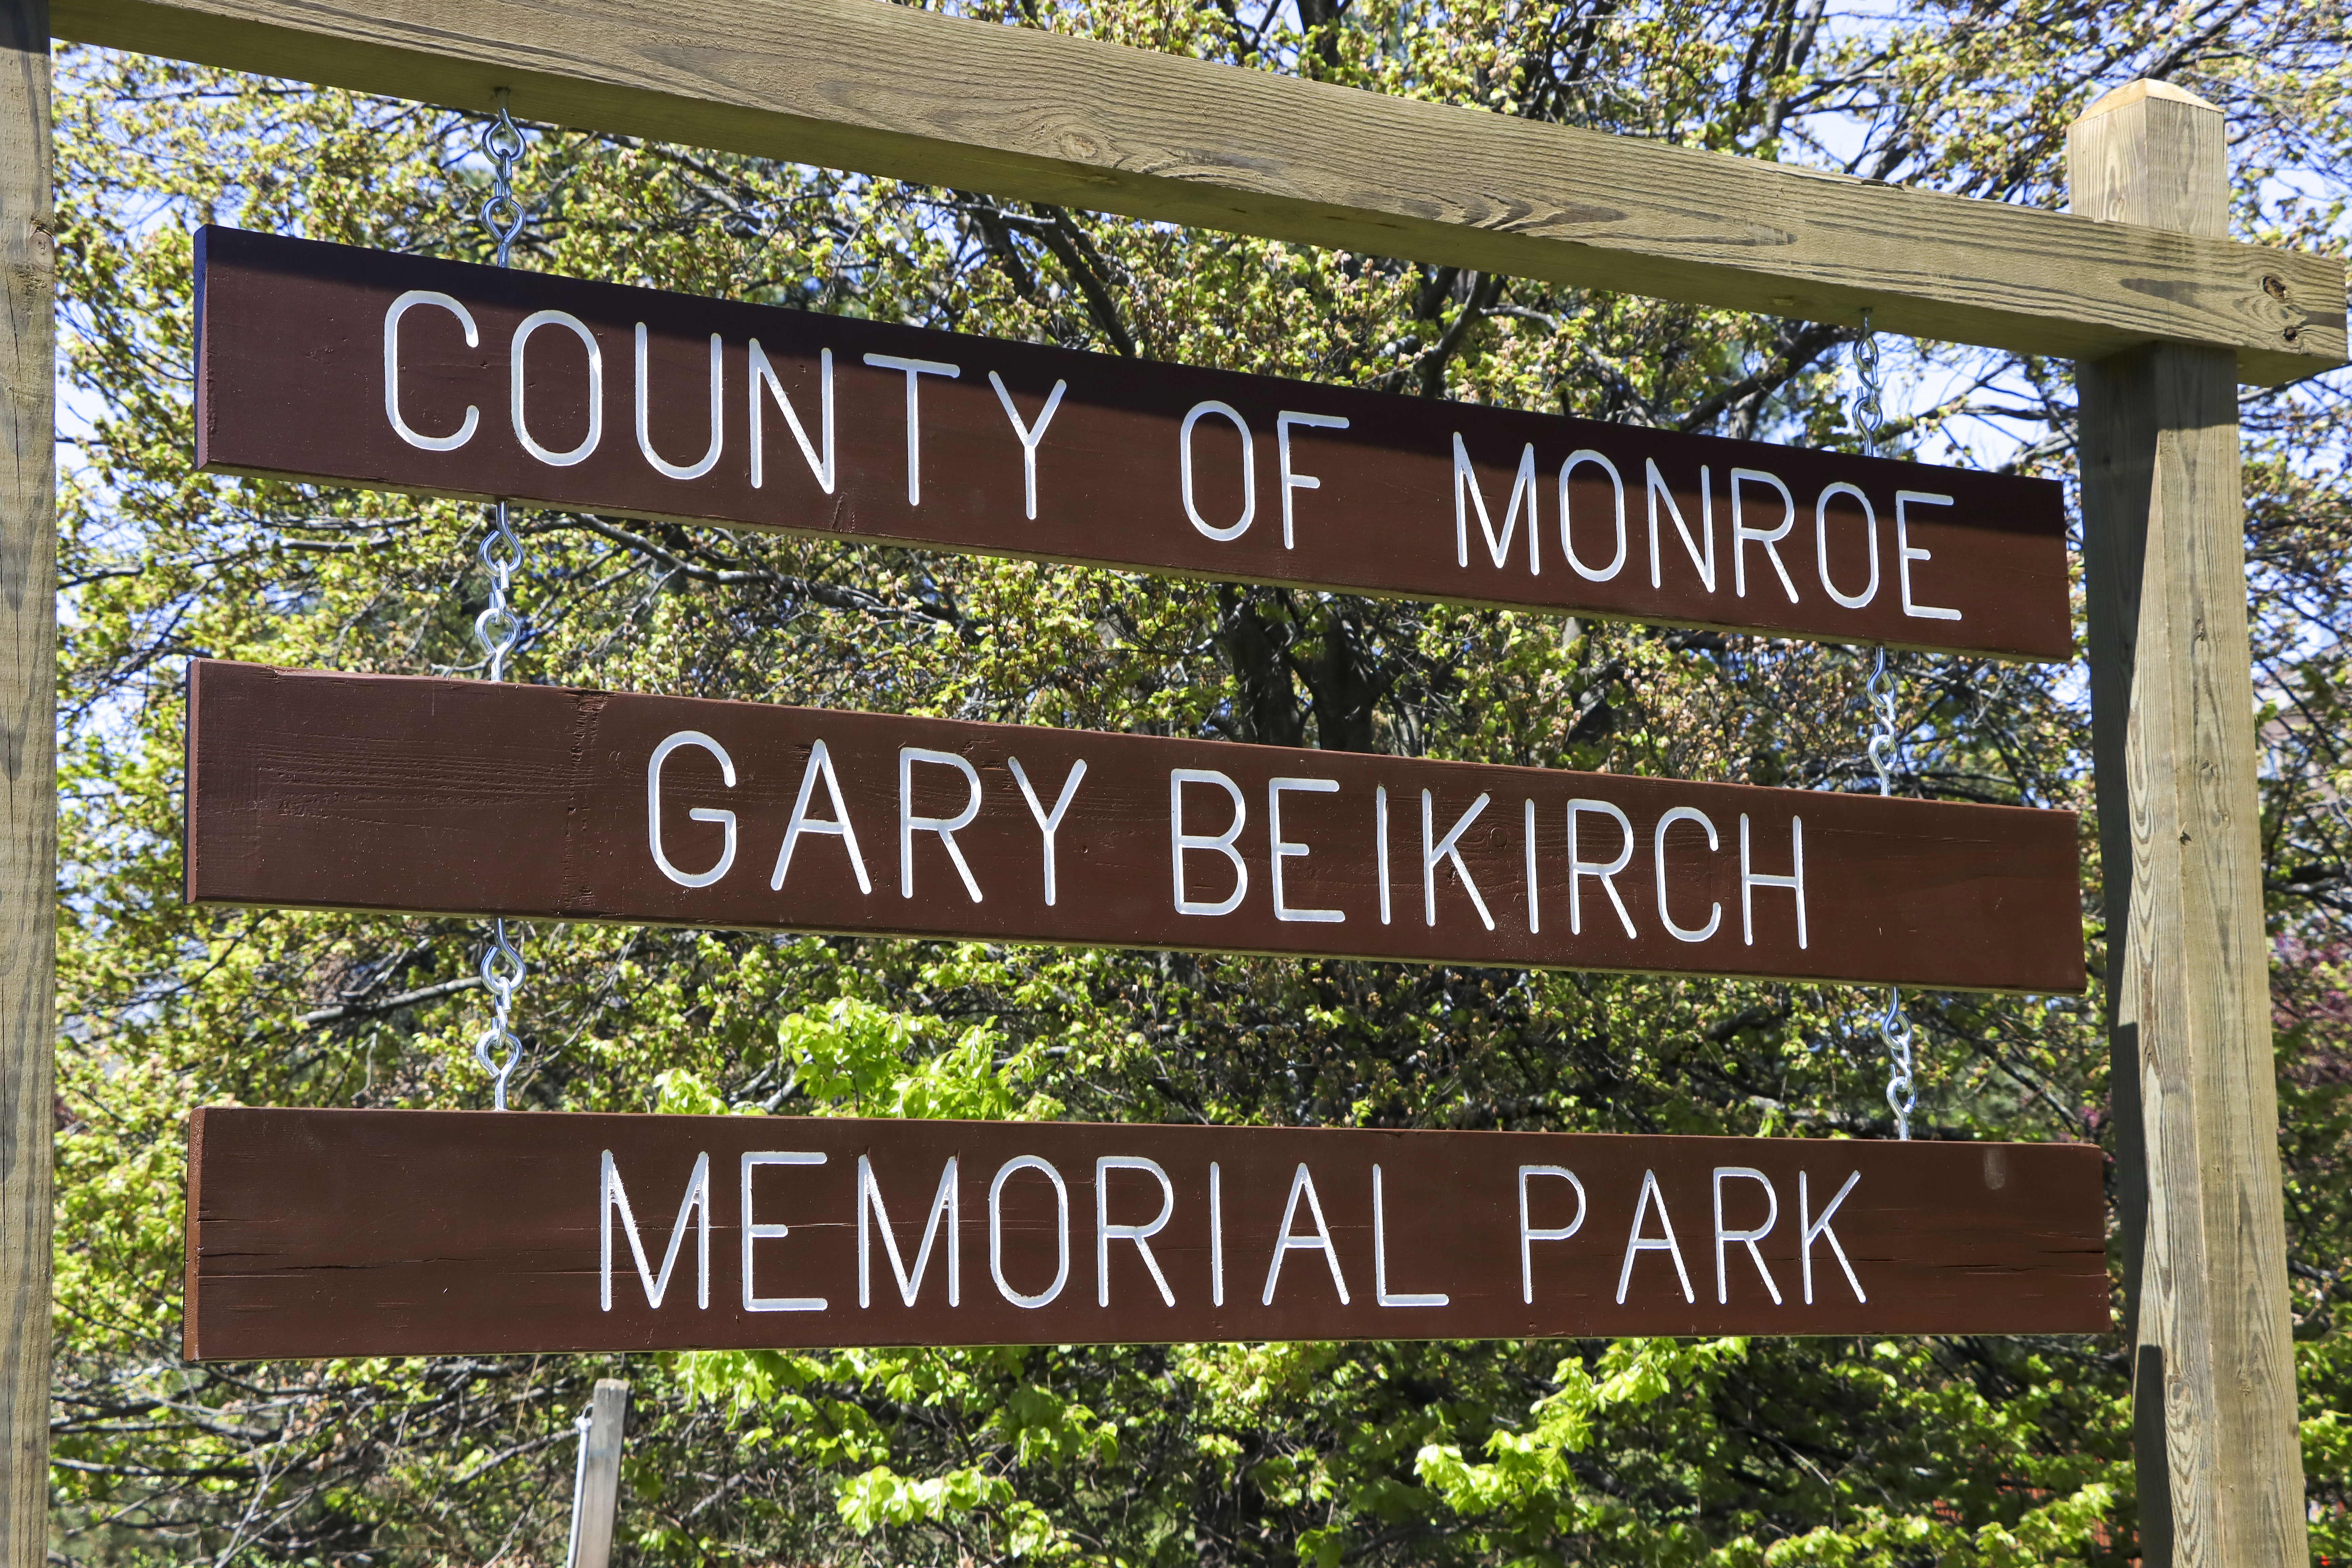 The entrance sign to Beikirch park